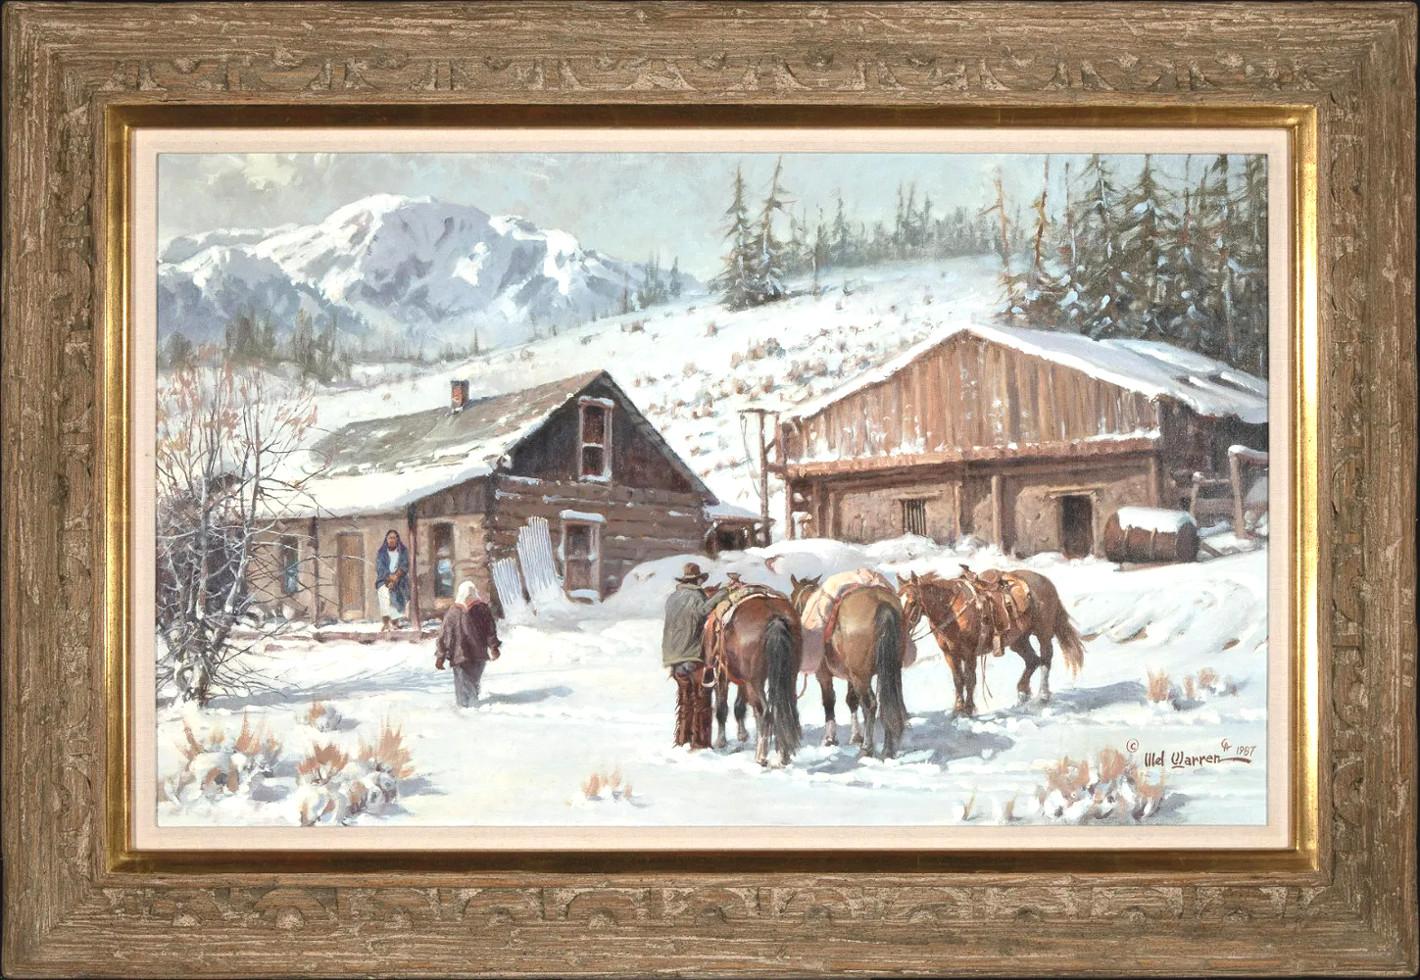 Melvin Warren Animal Painting - "TRAIL TO EAGLE NEST" WESTERN SNOW COWBOY ARTISTS OF AMERICA NICE! FRAME 32 X 46